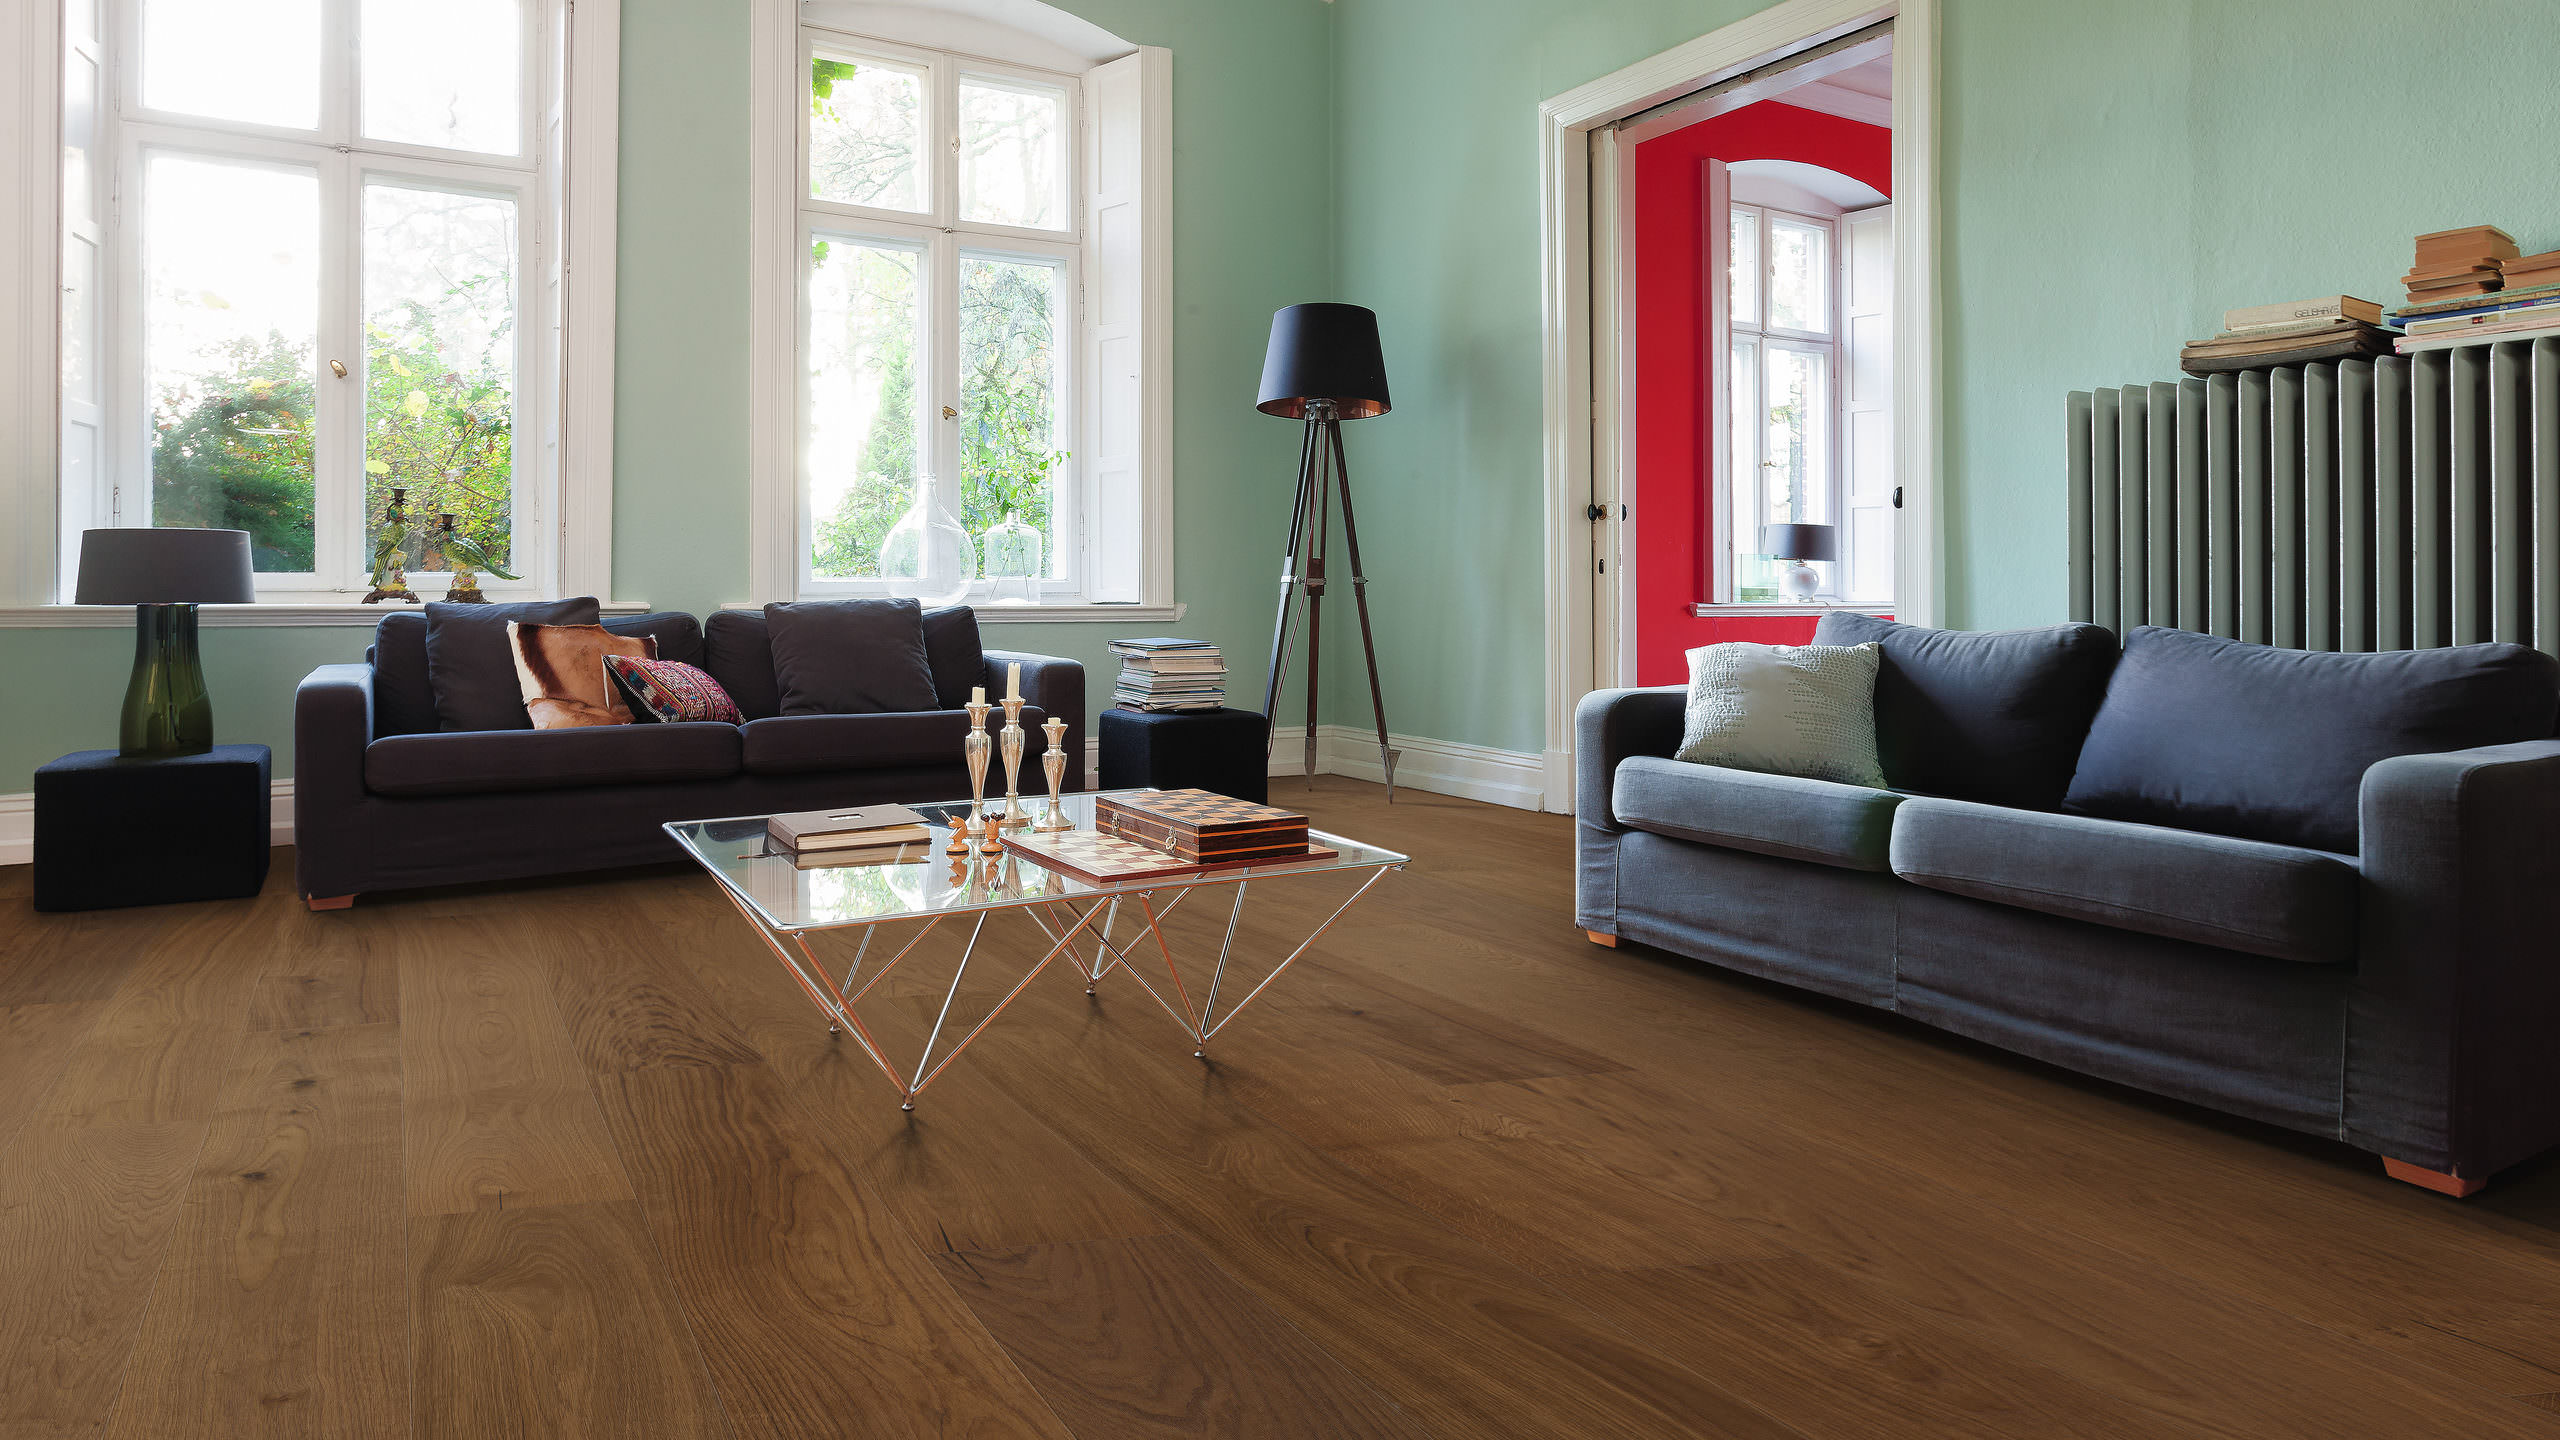 HARO PARQUET 4000 Plank 1-Strip Plaza 240 4V Smoked Oak Sauvage brushed naturaLin plus Top Connect